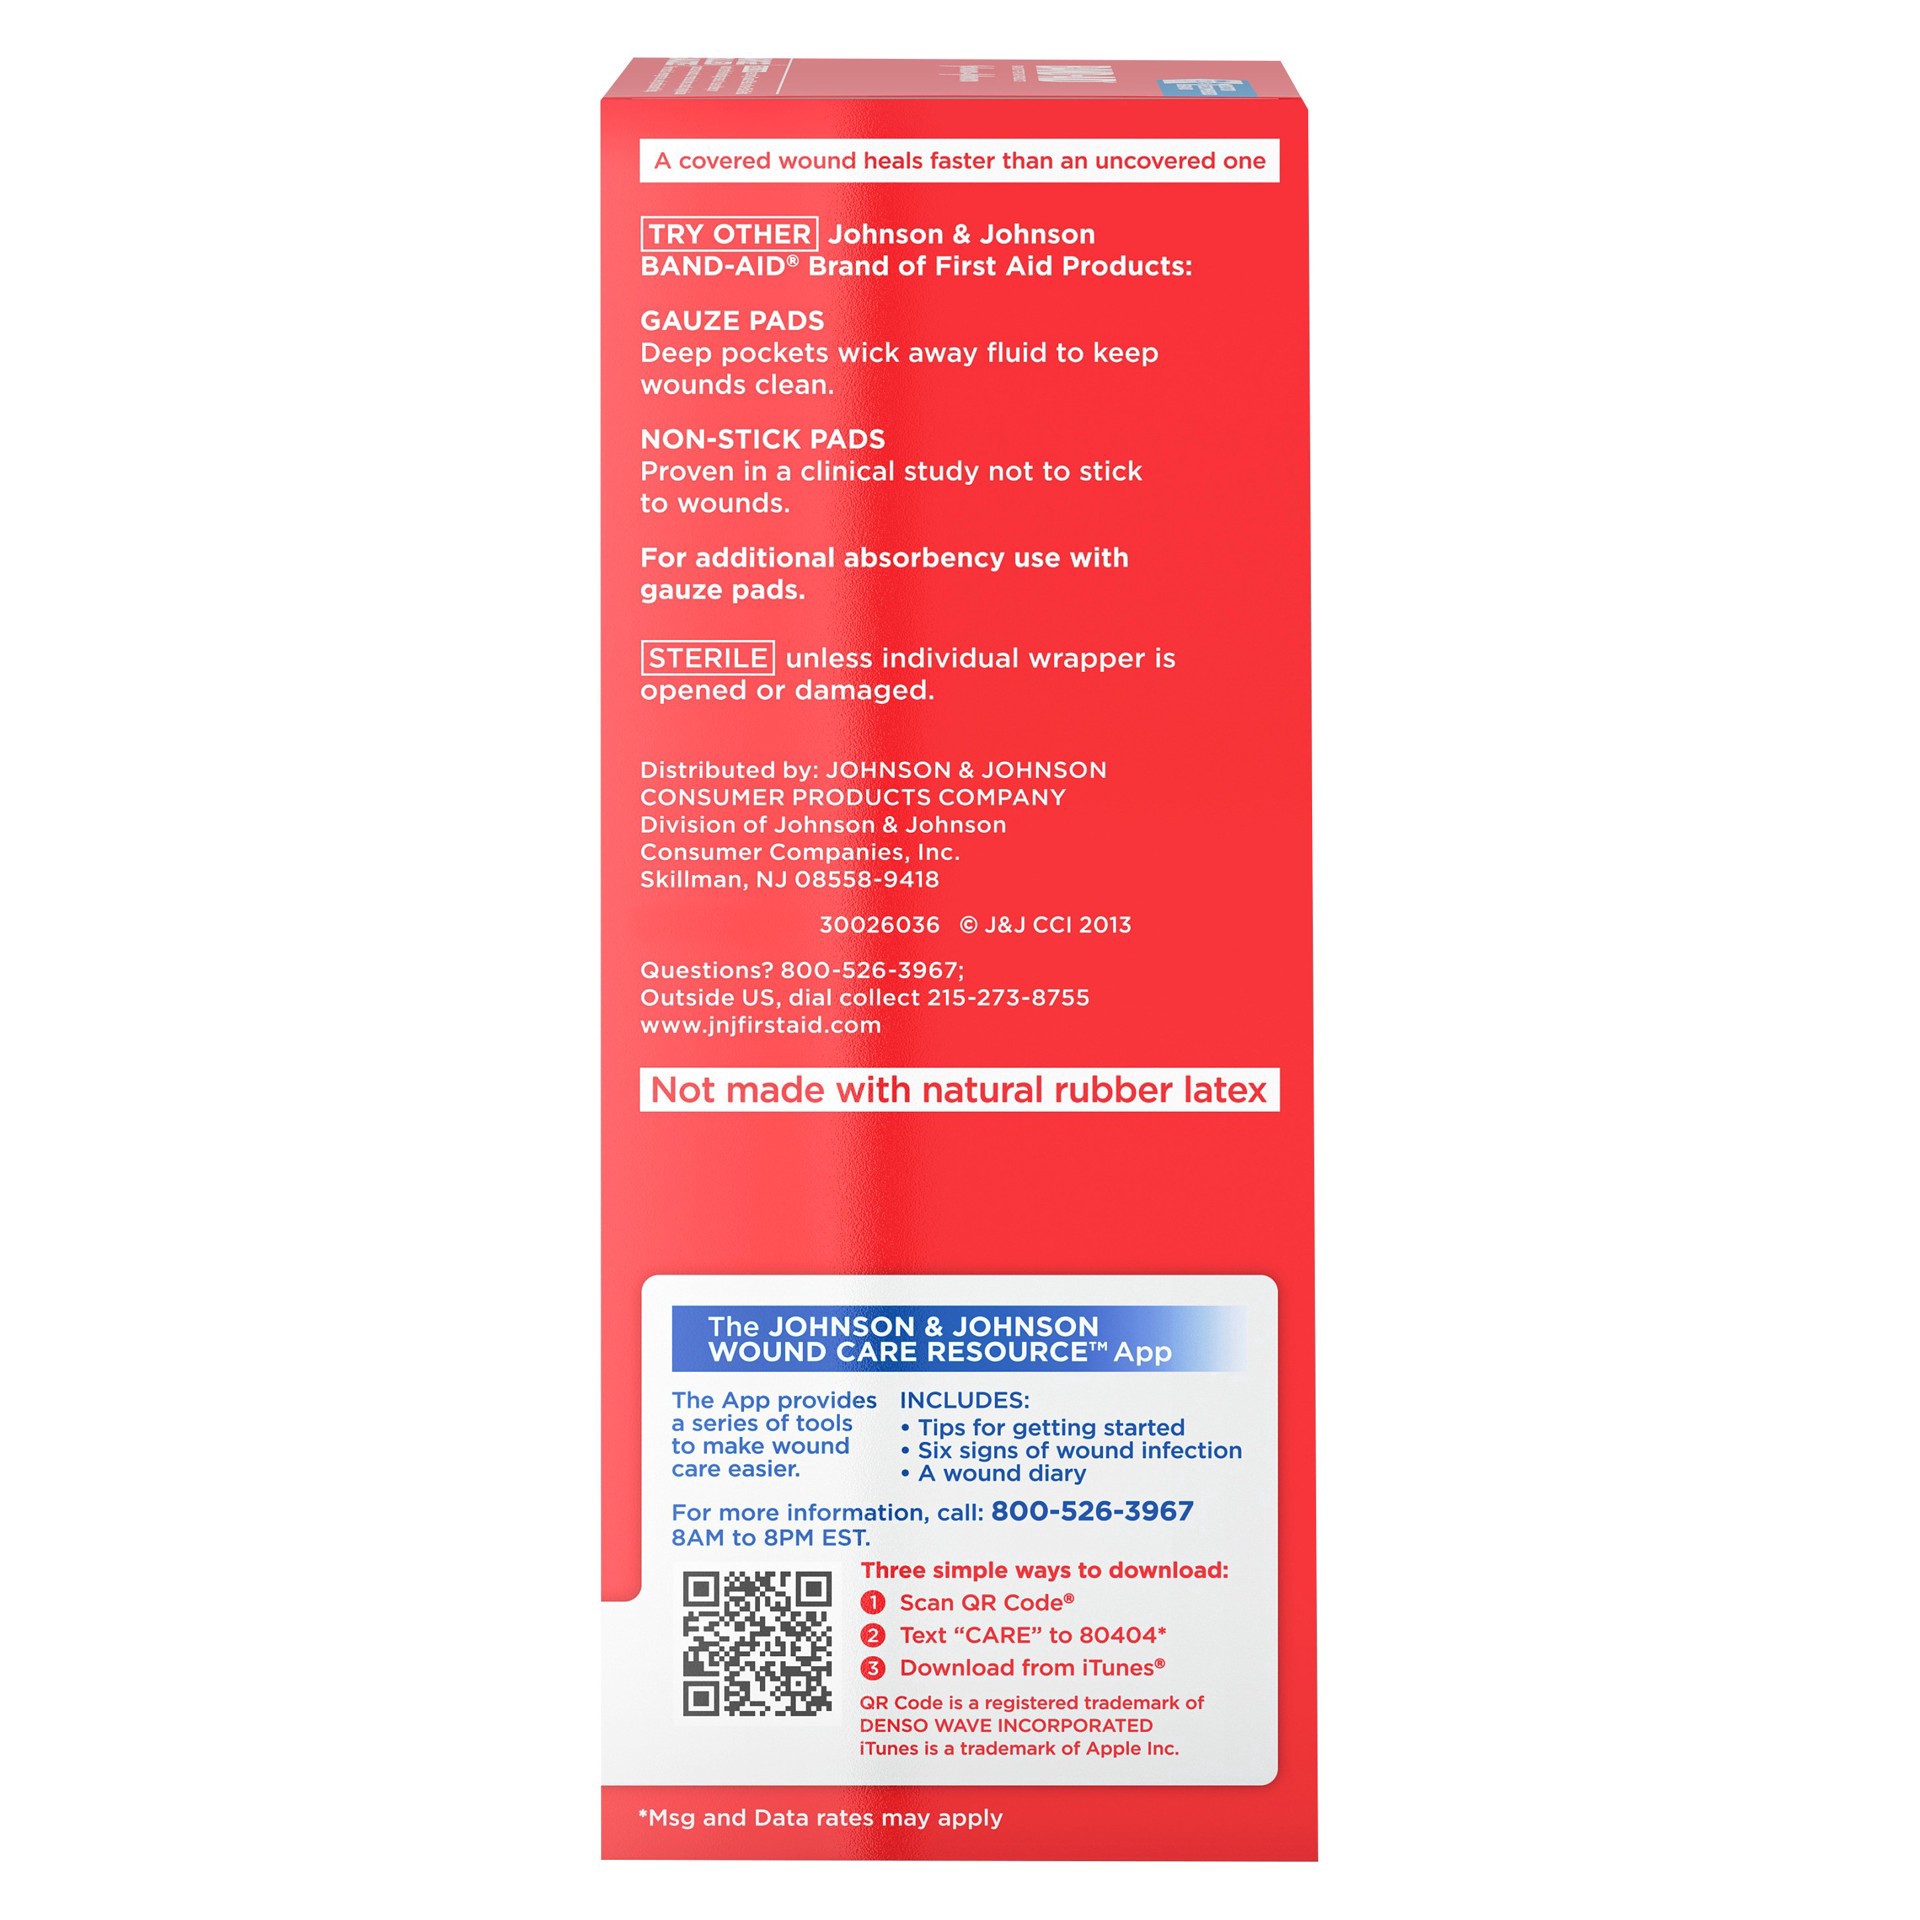 slide 13 of 15, BAND-AID Band Aid Brand of First Aid Products Flexible Rolled Gauze Dressing for Minor Wound Care, soft Padding and Instant Absorption, 4 Inches by 2.5 Yards, 1 ct